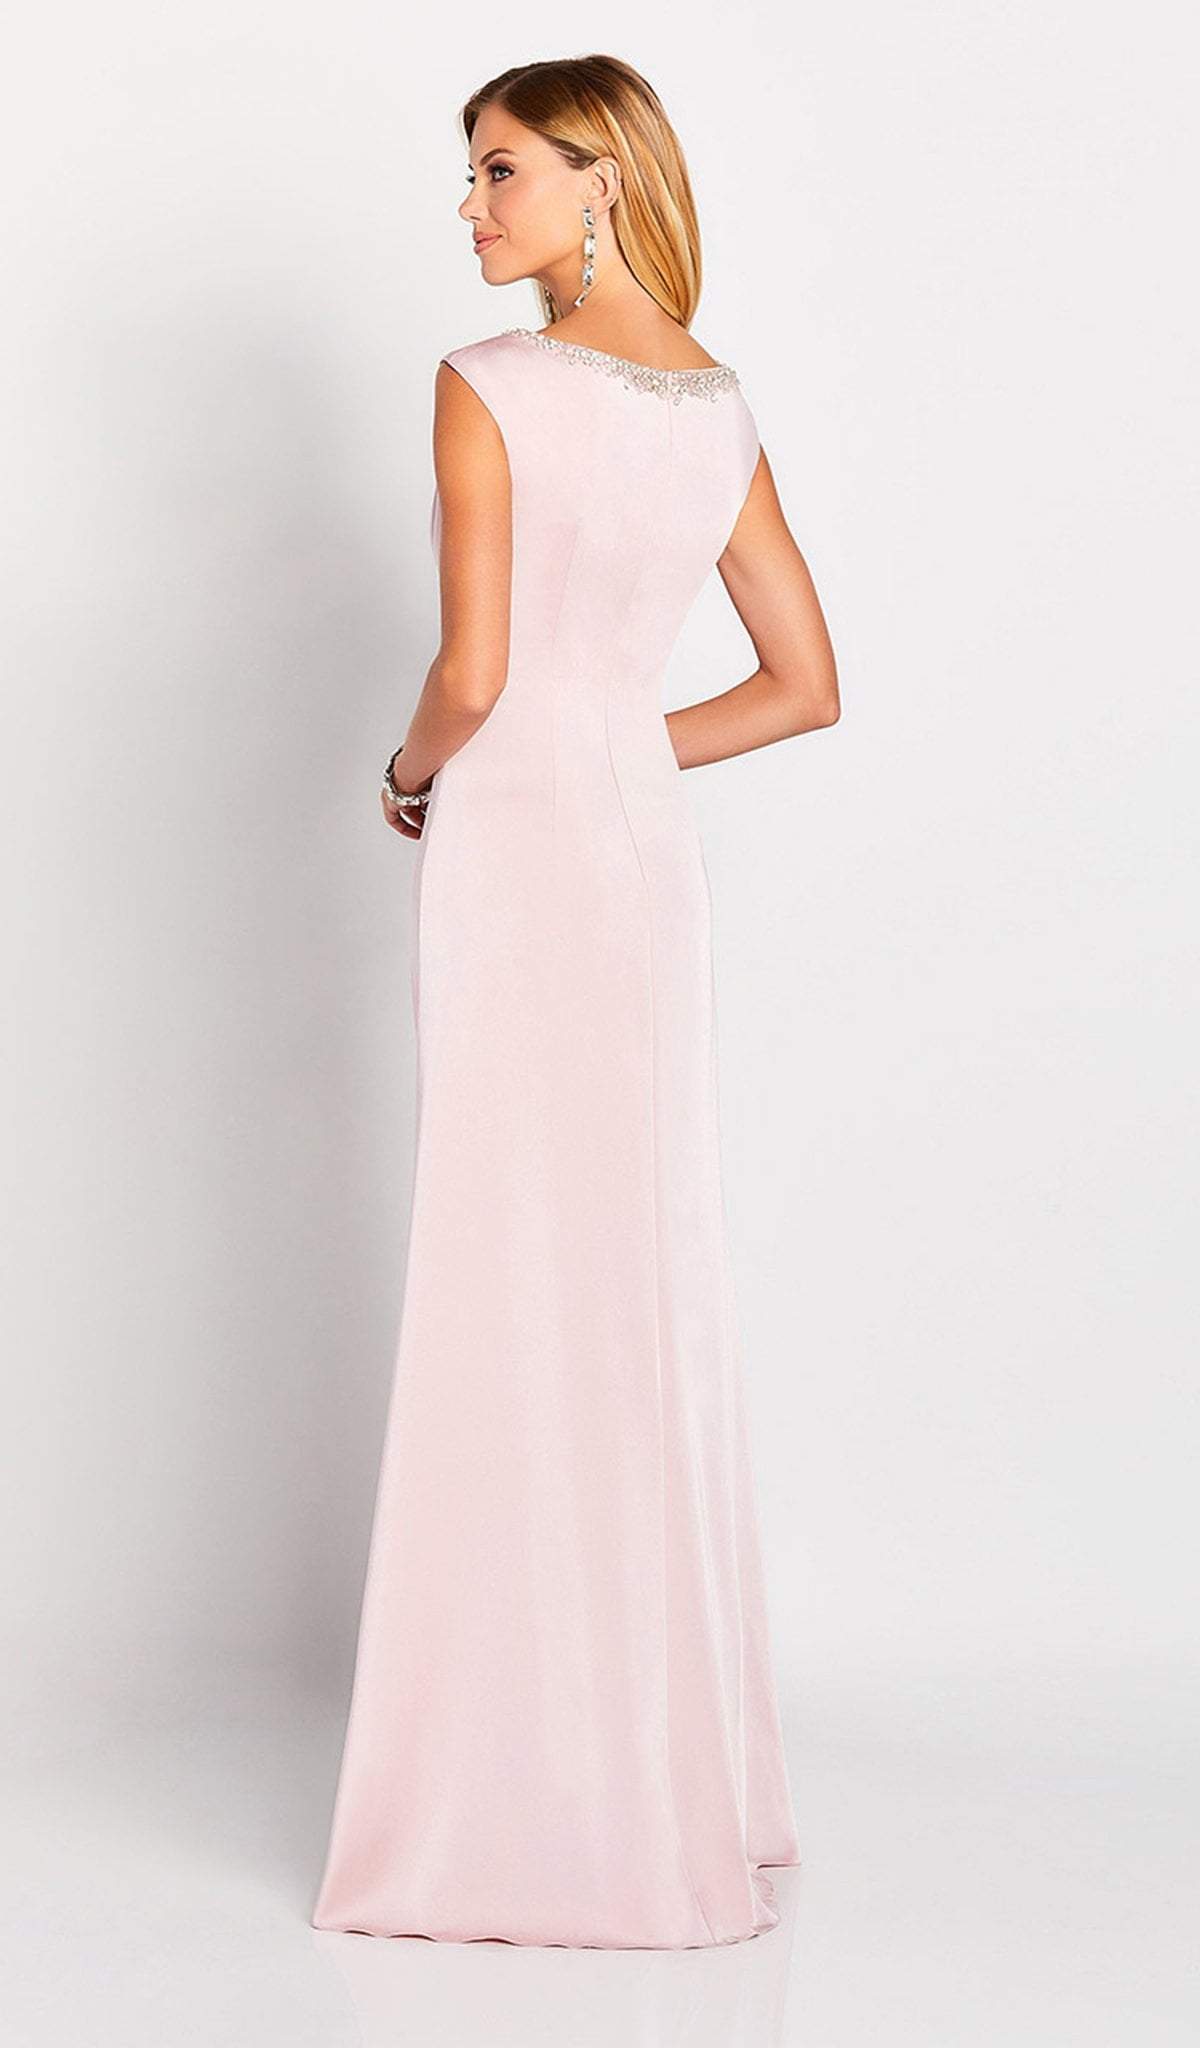 Cameron Blake by Mon Cheri - 119647 Beaded Bateau Neck Sheath Gown Mother of the Bride Dresses